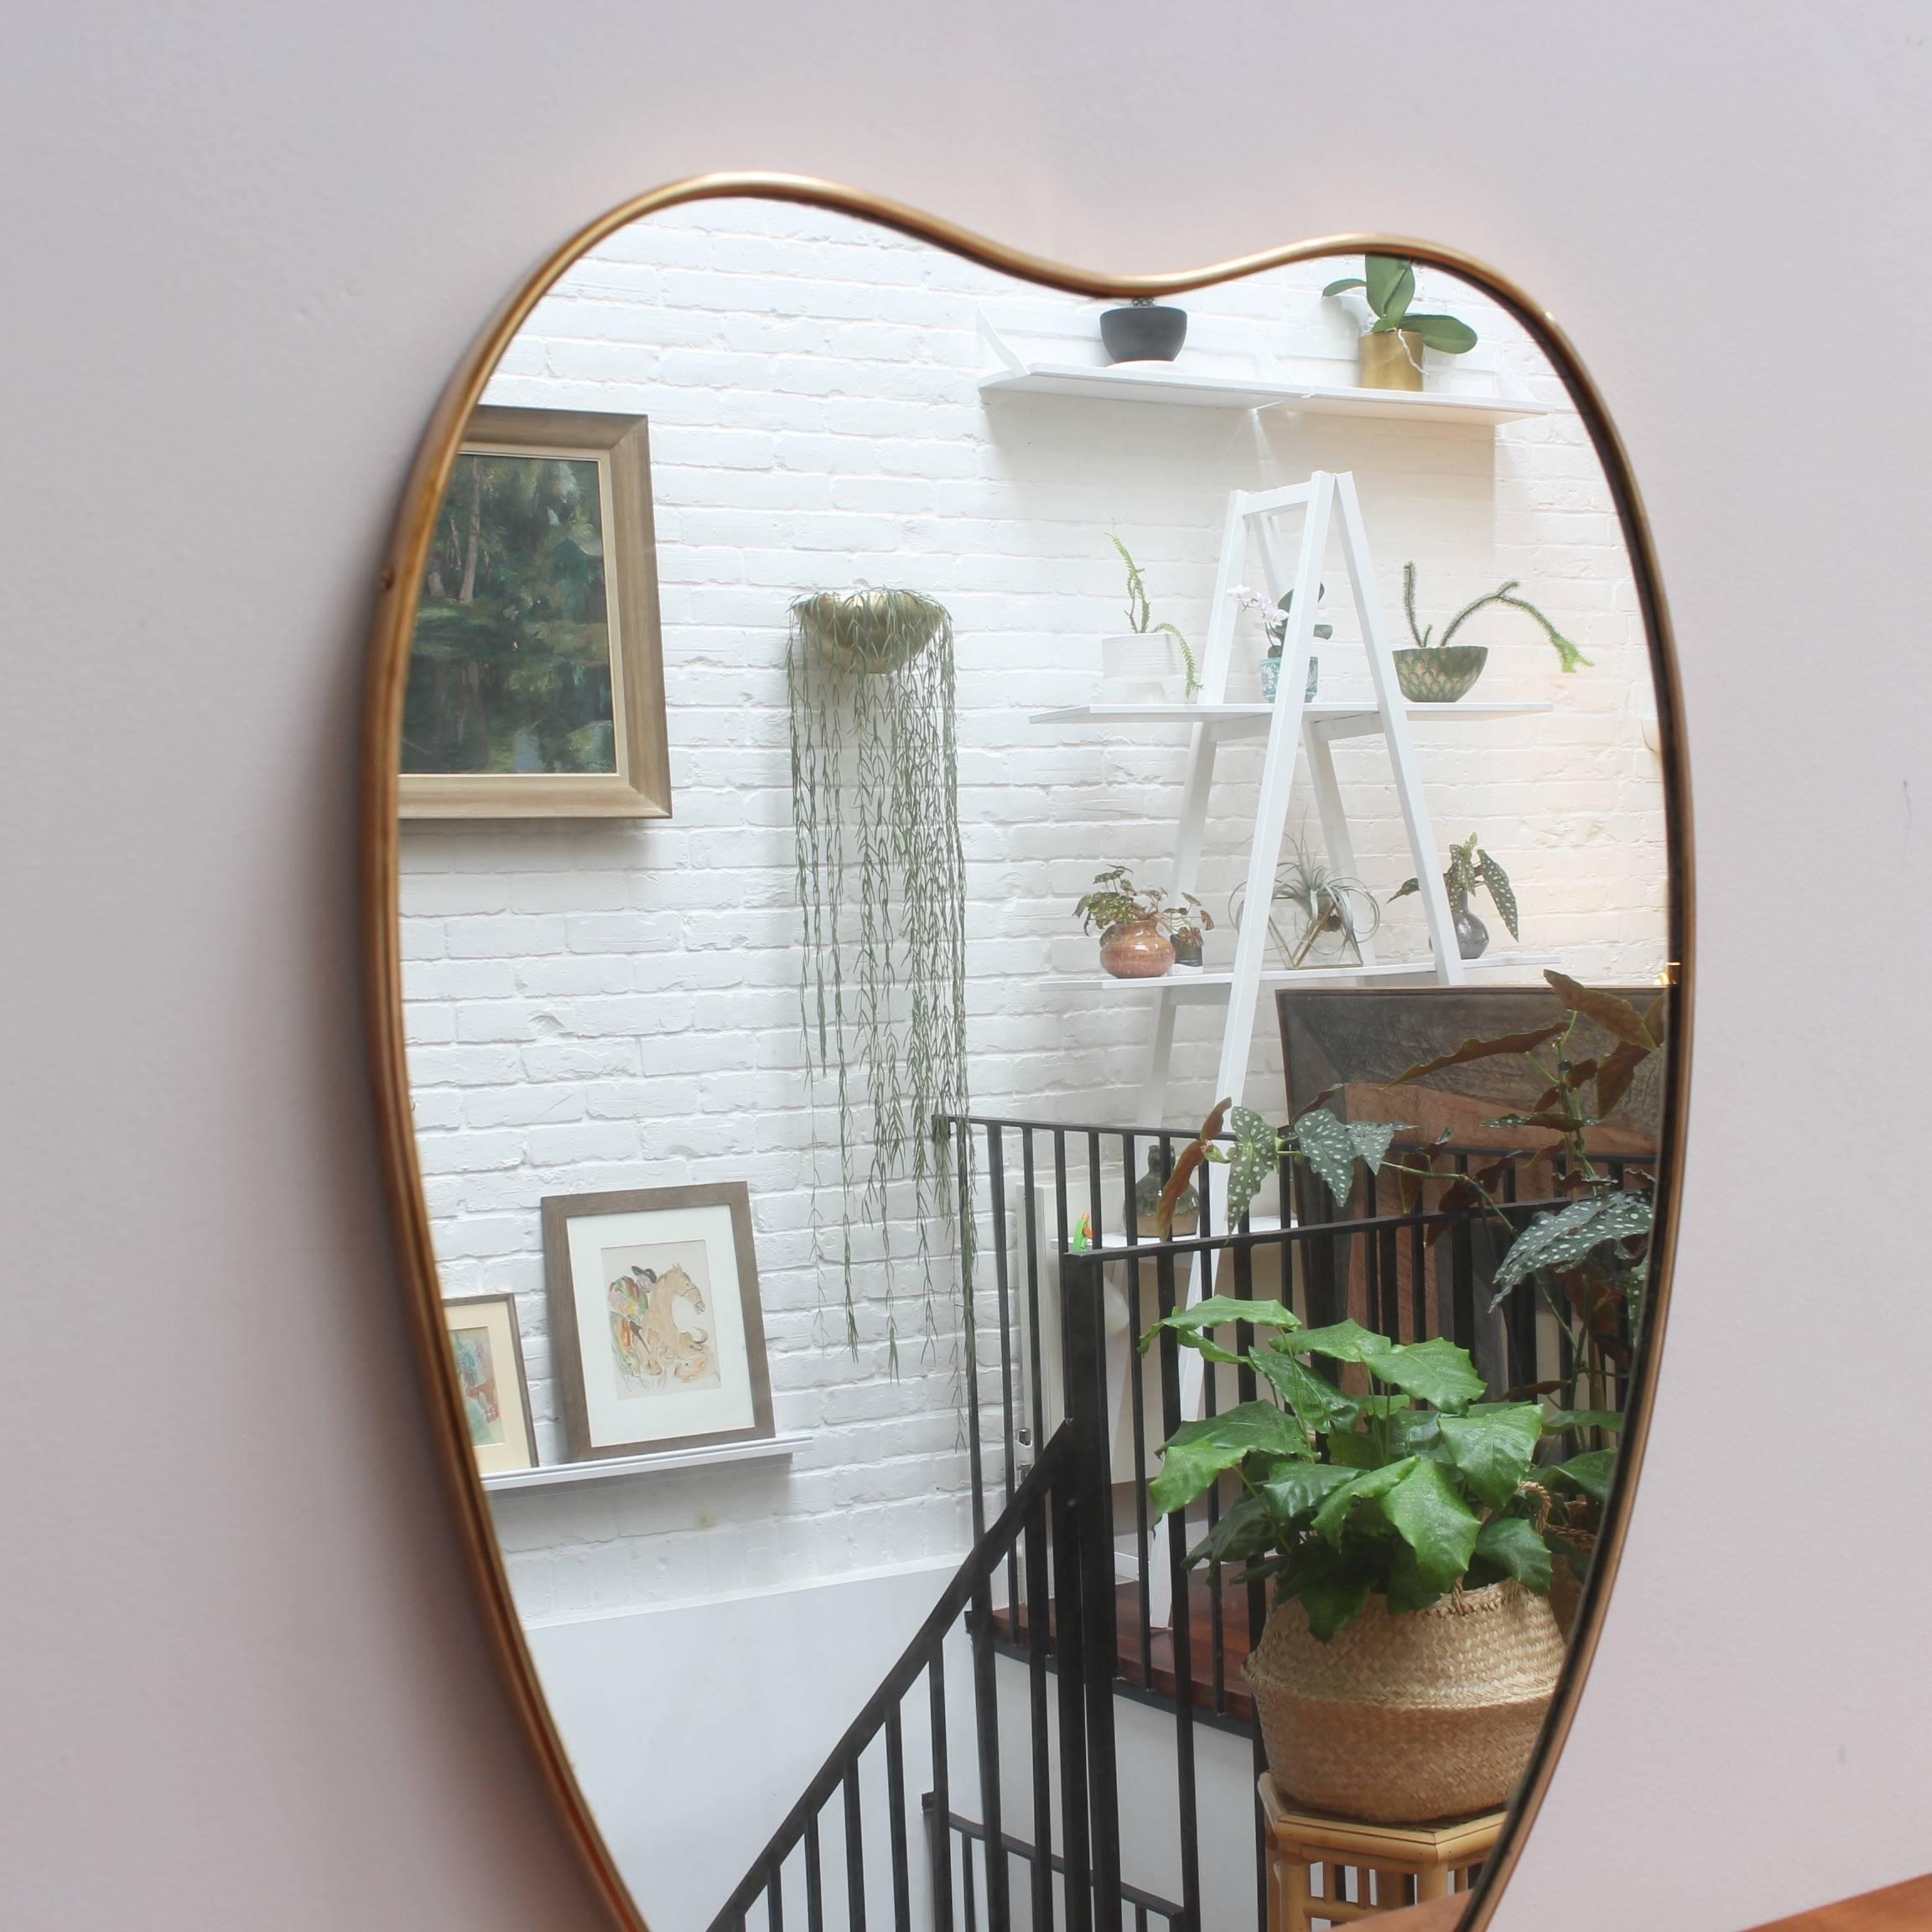 Midcentury Italian wall mirror with brass frame, circa 1950s. The mirror is apple-shaped and distinctive in a modern Gio Ponti style. This mirror is in good vintage condition. There are some evident but characterful blemishes on the brass frame and